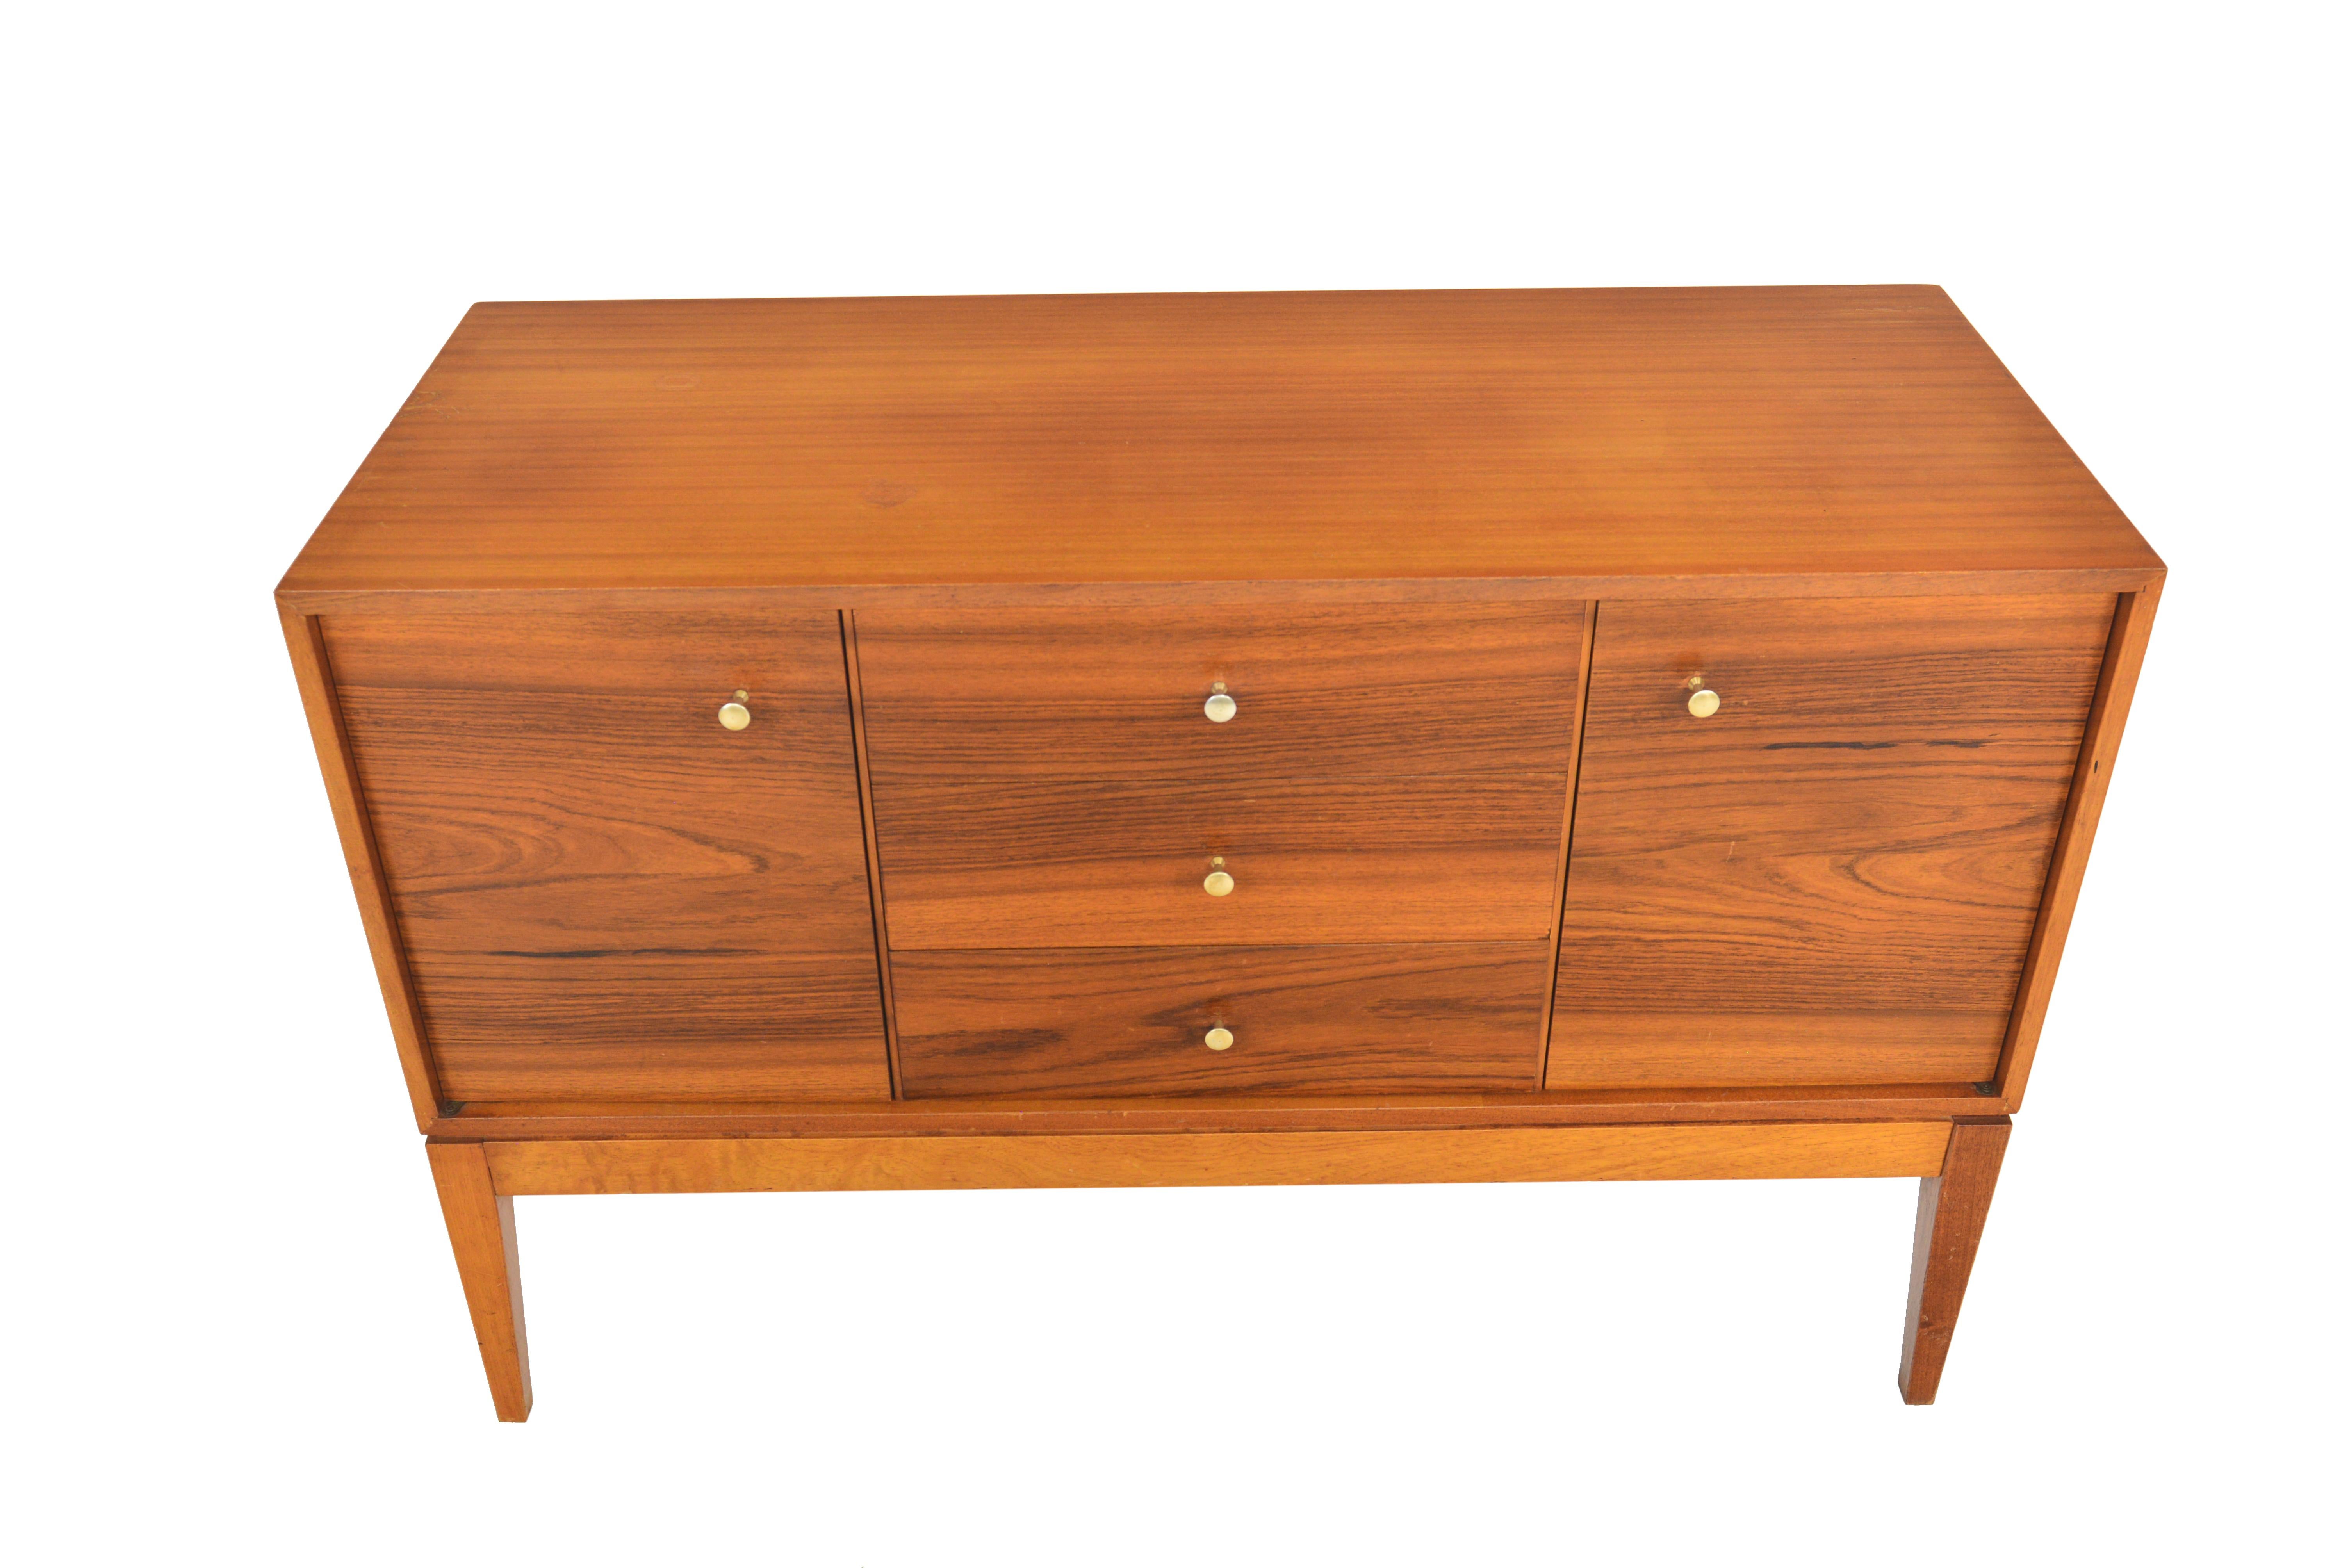 English Midcentury Rosewood and Mahogany Low Dresser